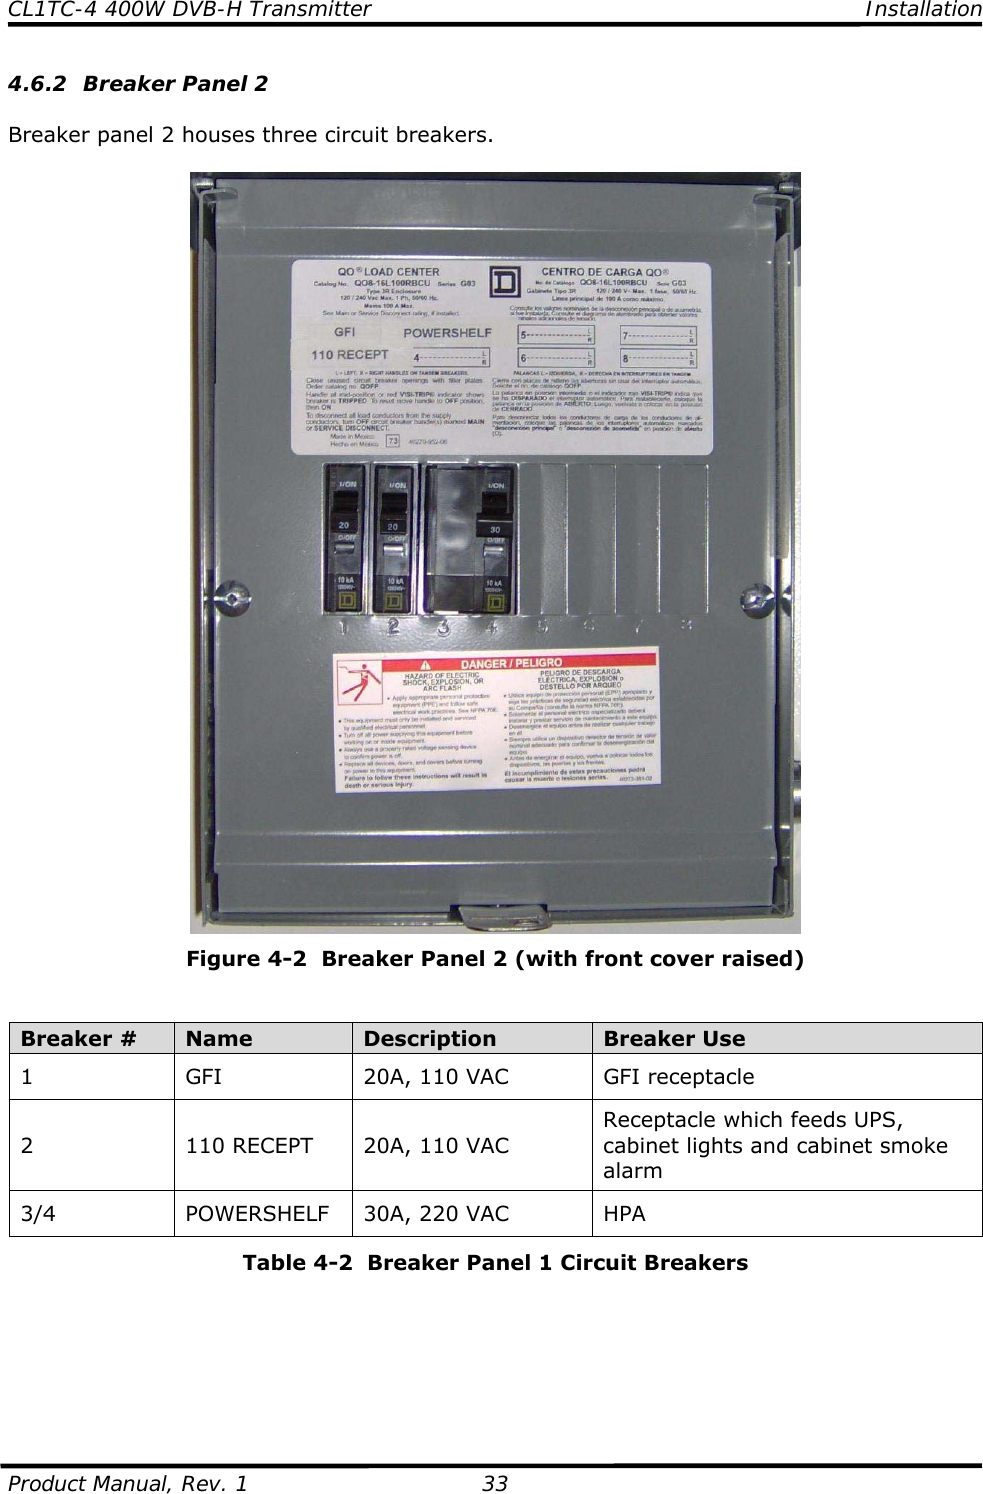 CL1TC-4 400W DVB-H Transmitter    Installation  Product Manual, Rev. 1  33 4.6.2 Breaker Panel 2  Breaker panel 2 houses three circuit breakers.   Figure 4-2  Breaker Panel 2 (with front cover raised)   Breaker #  Name  Description  Breaker Use 1  GFI  20A, 110 VAC  GFI receptacle 2  110 RECEPT  20A, 110 VAC Receptacle which feeds UPS, cabinet lights and cabinet smoke alarm 3/4 POWERSHELF 30A, 220 VAC HPA Table 4-2  Breaker Panel 1 Circuit Breakers       